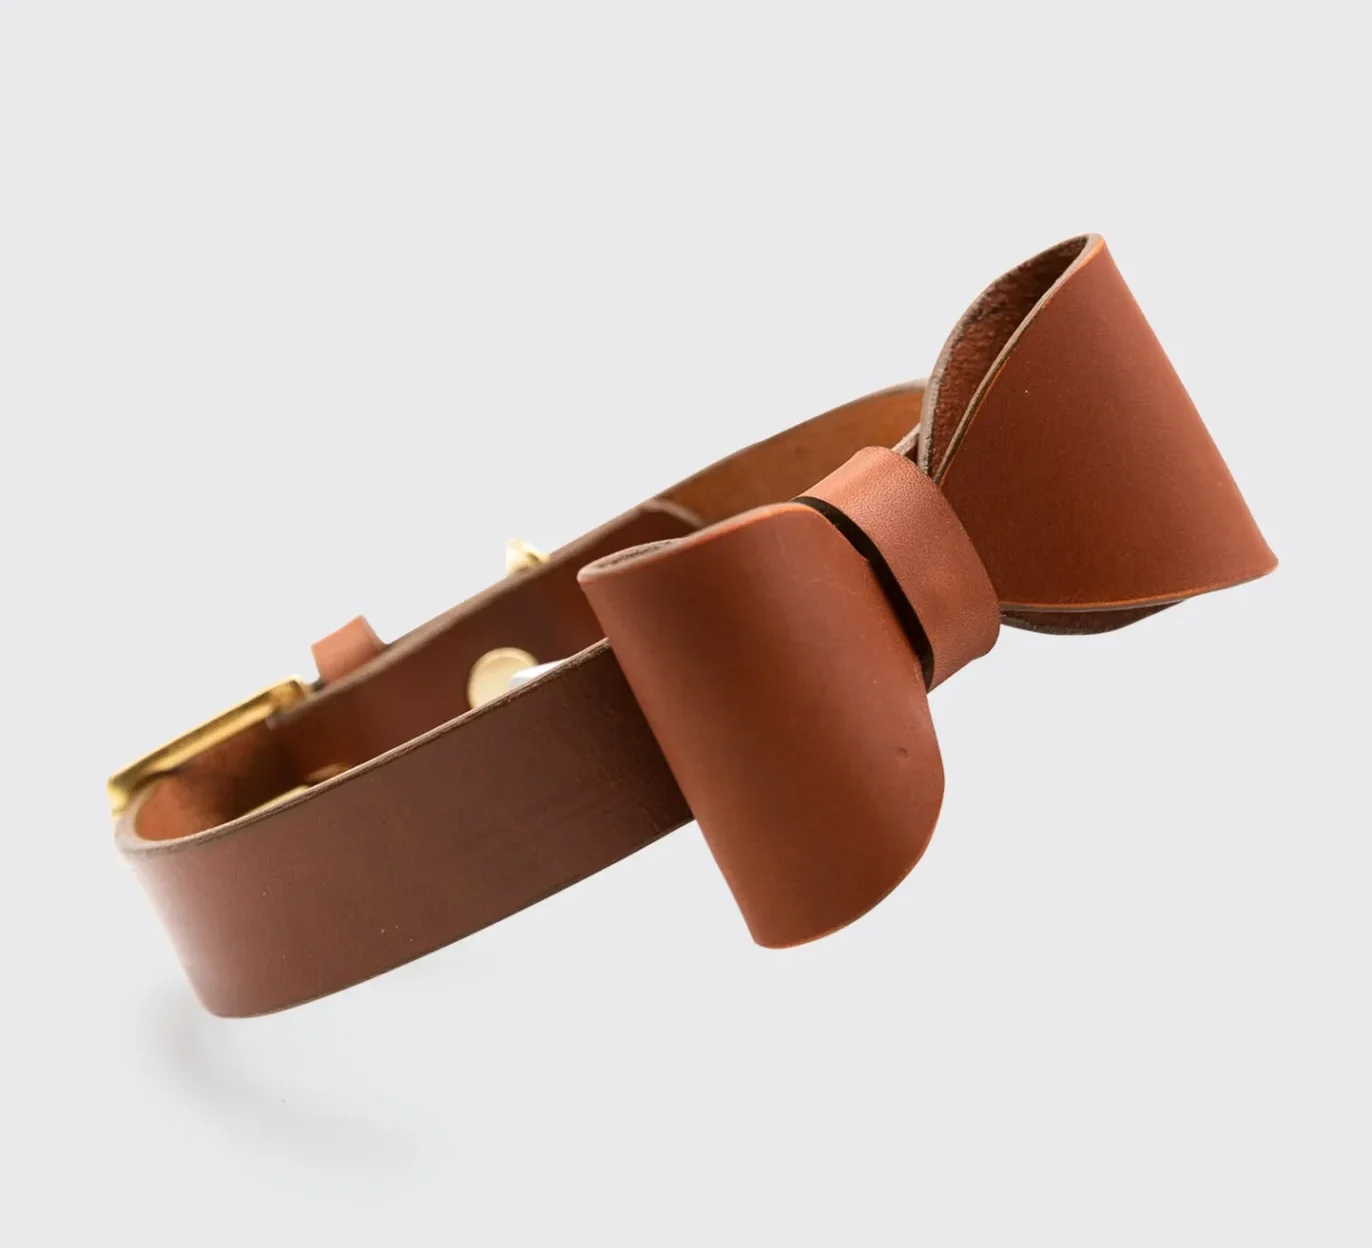 Chic designer dog collars to shop for your pup: GIANNI COOLING Dog Bow Tie Leather Collar